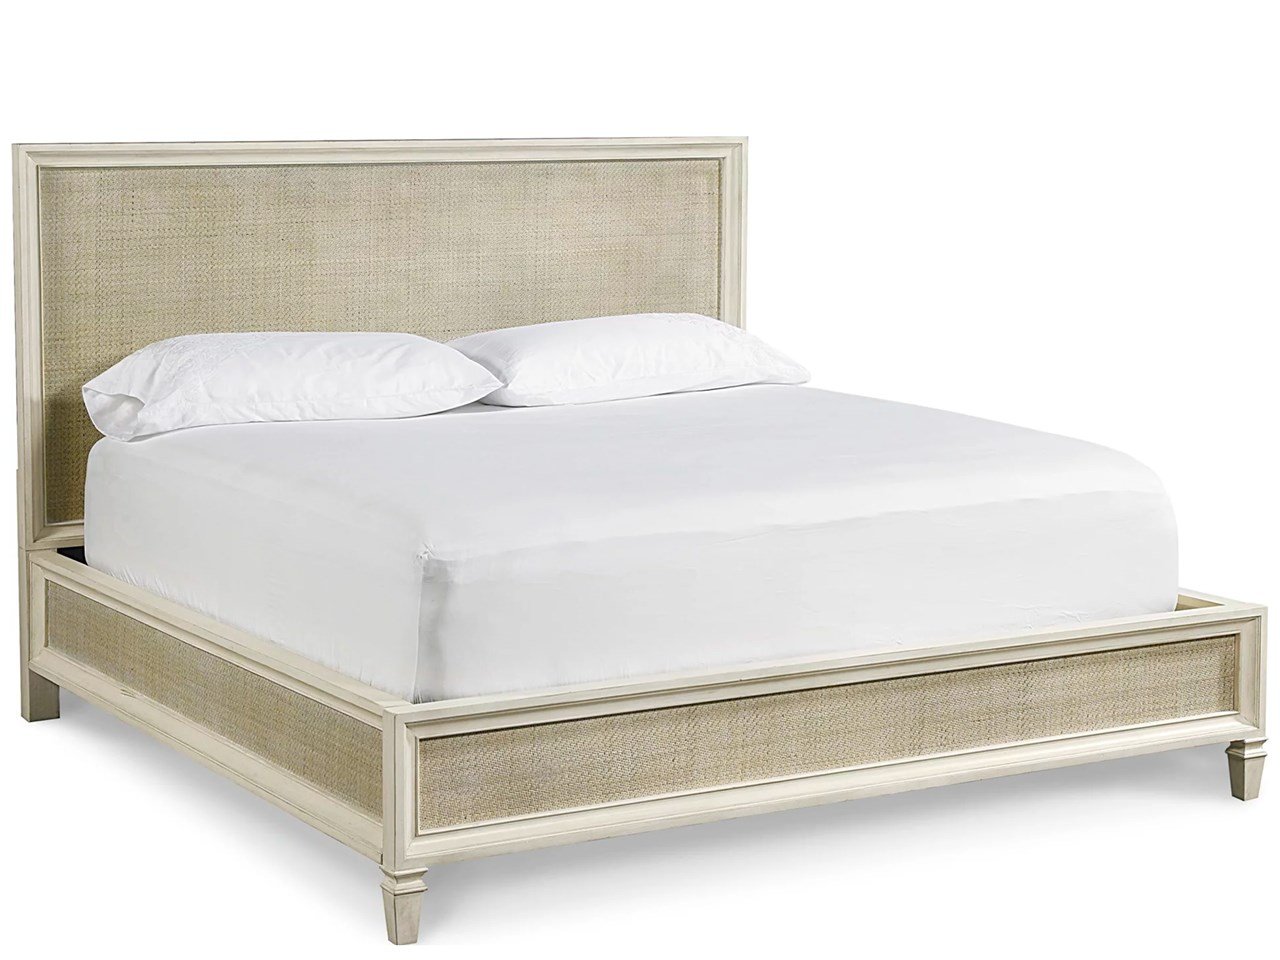 Woven Accent Cal King Bed